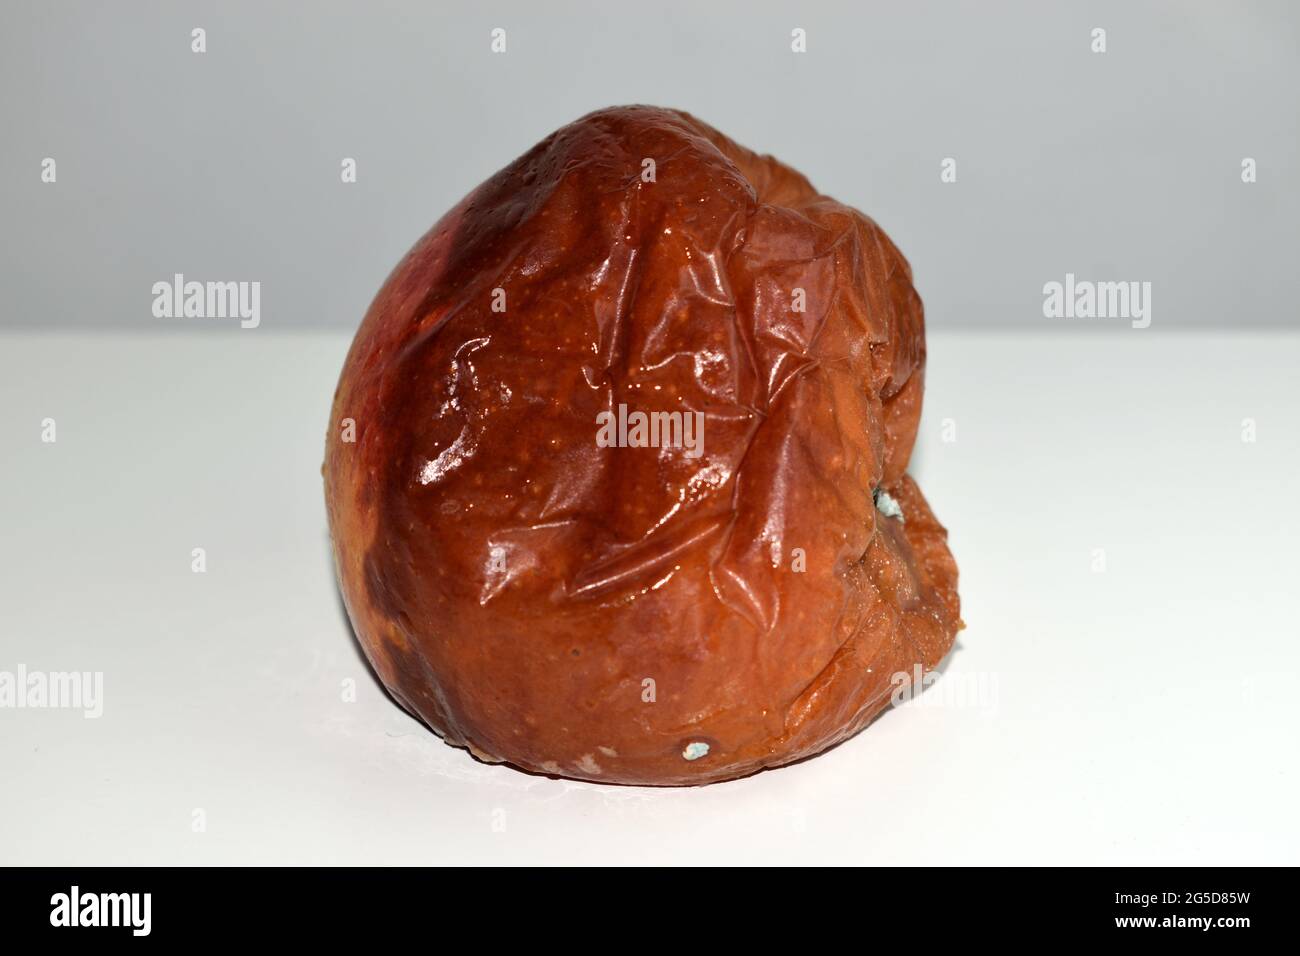 fully rotten single apple with affected by some fungus Stock Photo